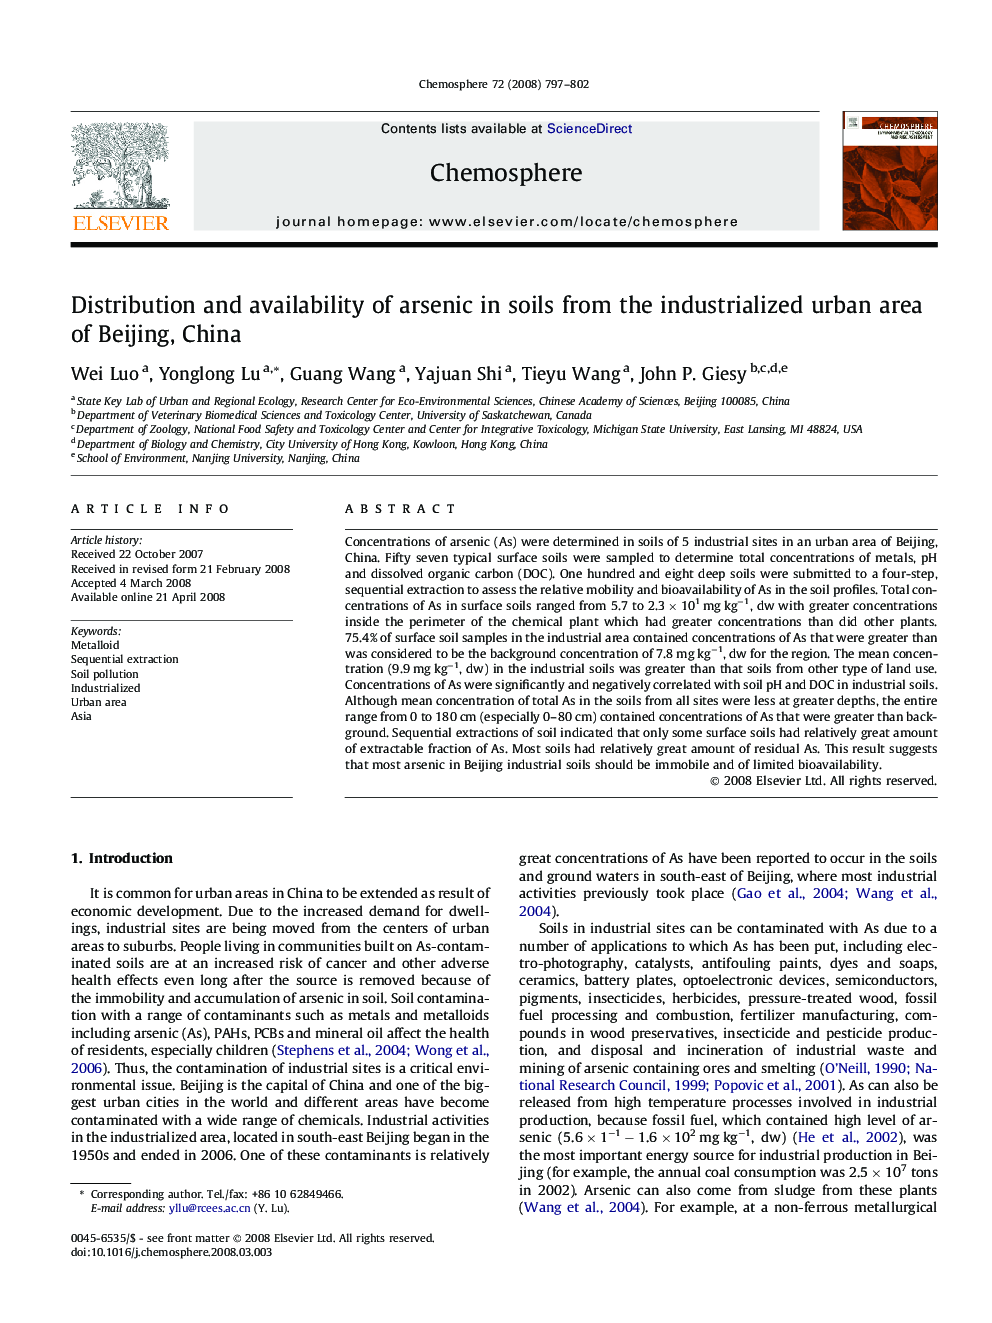 Distribution and availability of arsenic in soils from the industrialized urban area of Beijing, China